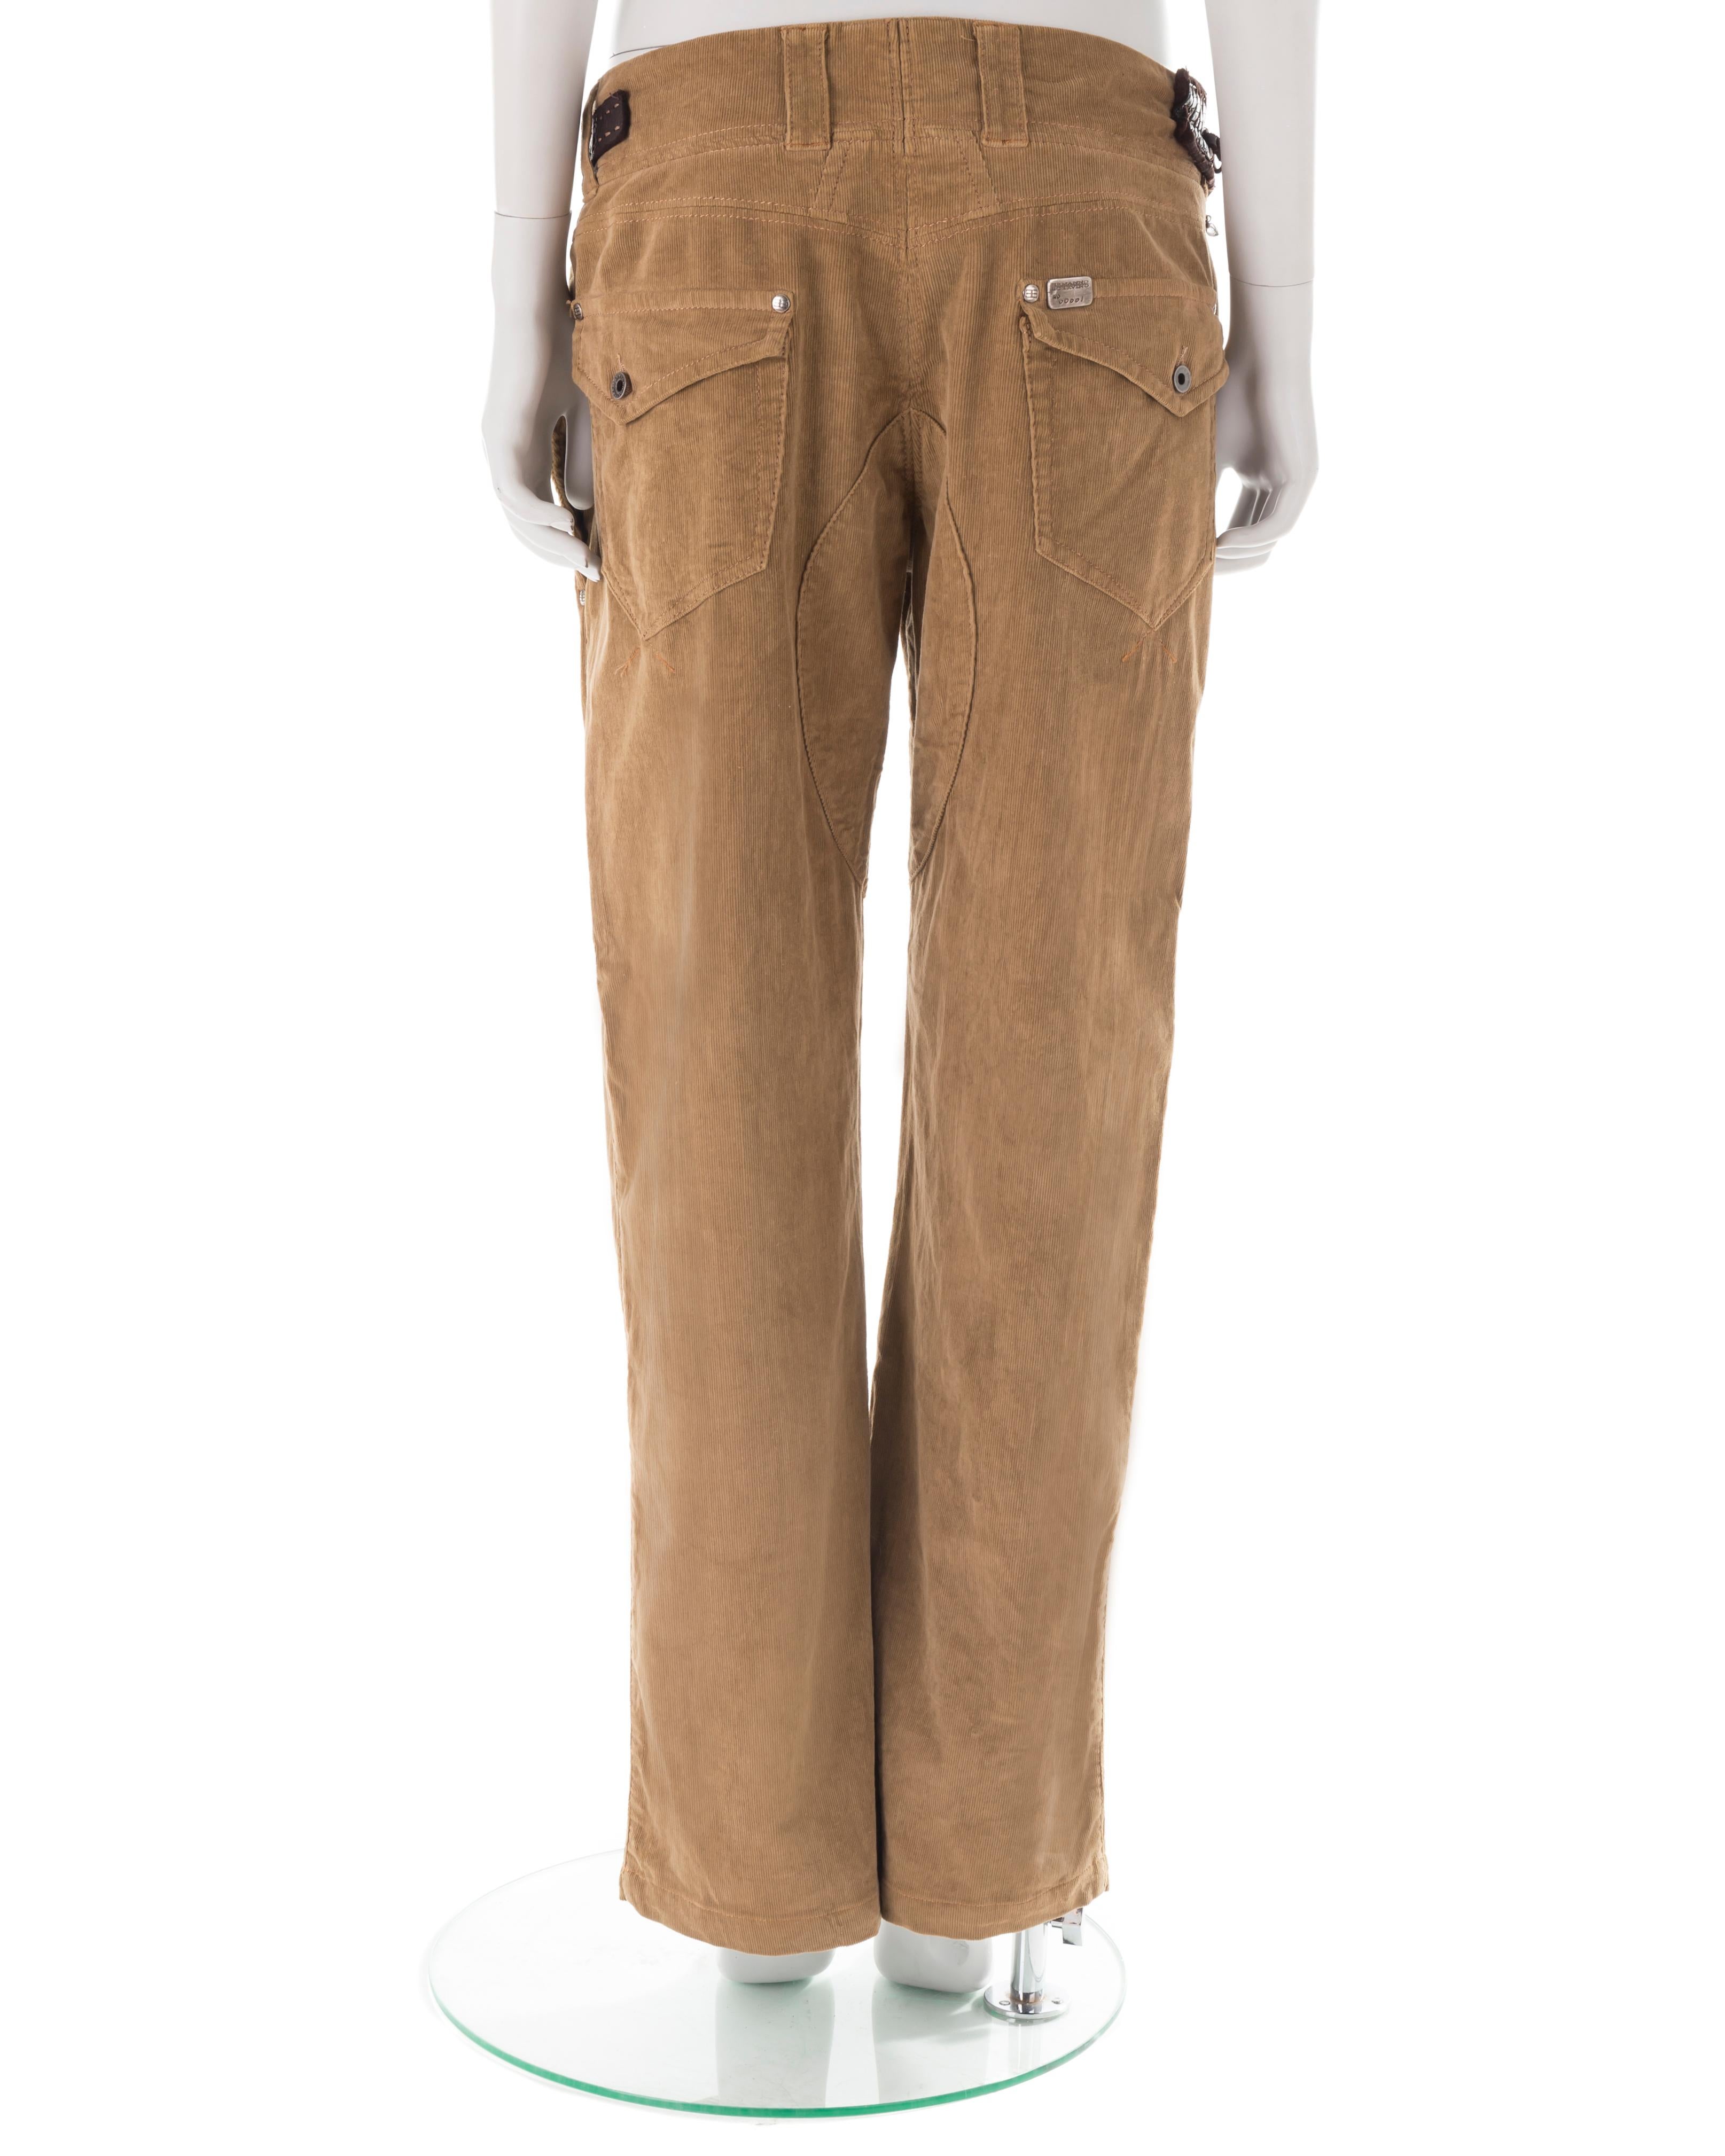 Ermanno Scervino F/W 2005 camel corduroy pants with maxi leather belt In Excellent Condition For Sale In Rome, IT